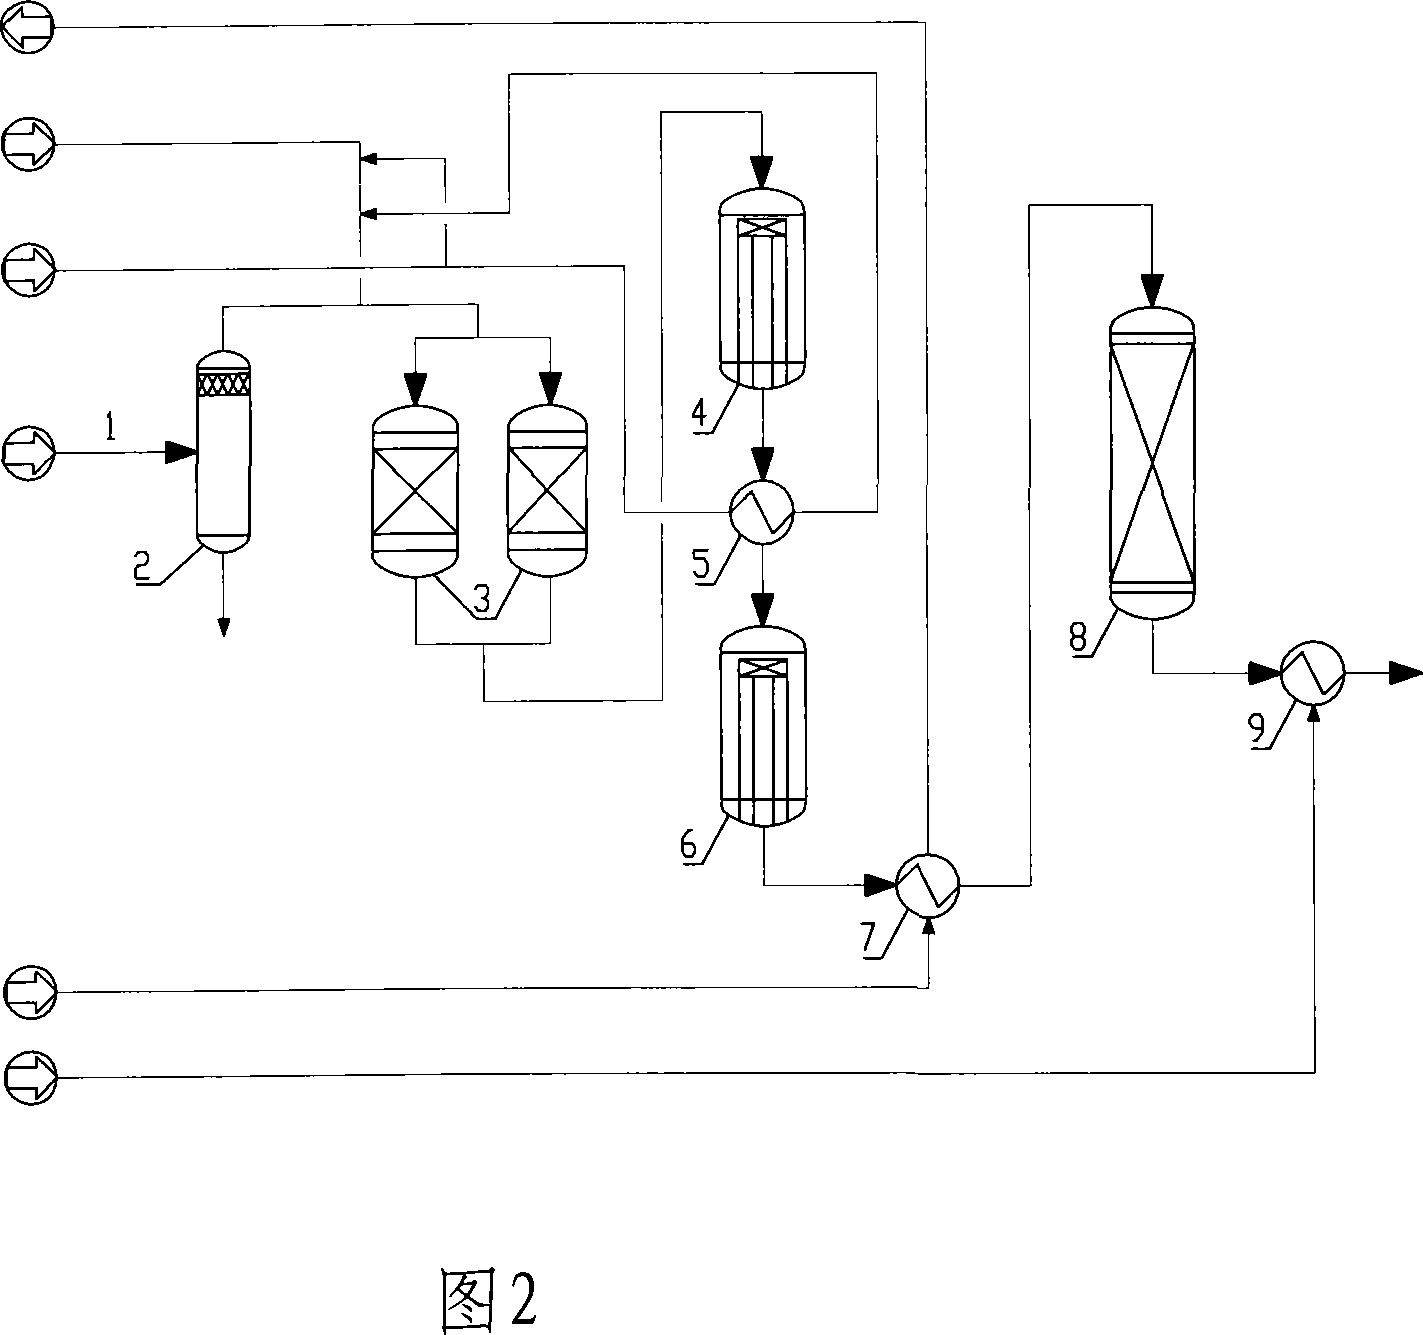 CO conversion technique matched to coal gasification